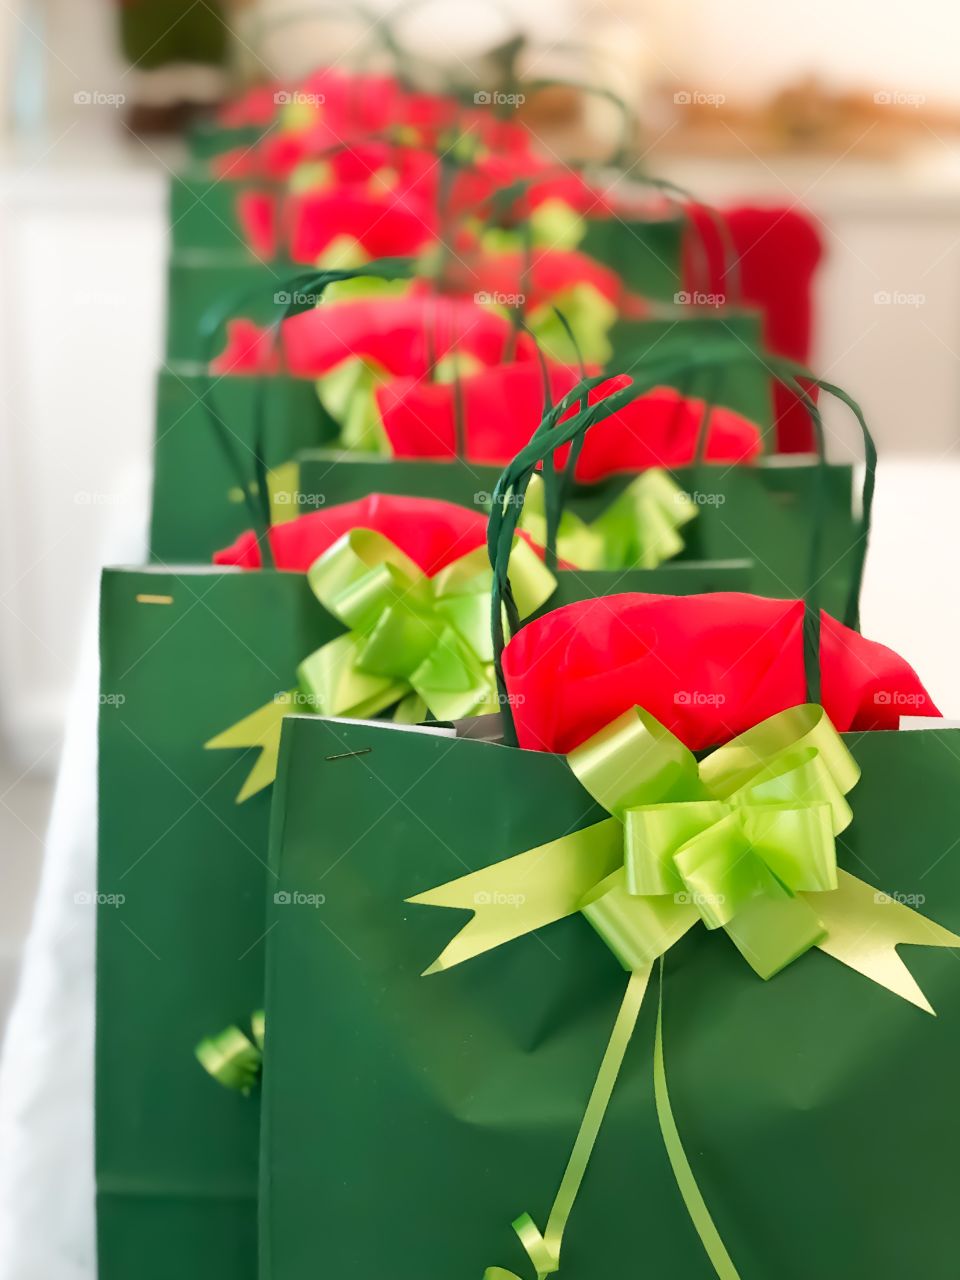 Gifts in green paper bags with red detail and green bow. 